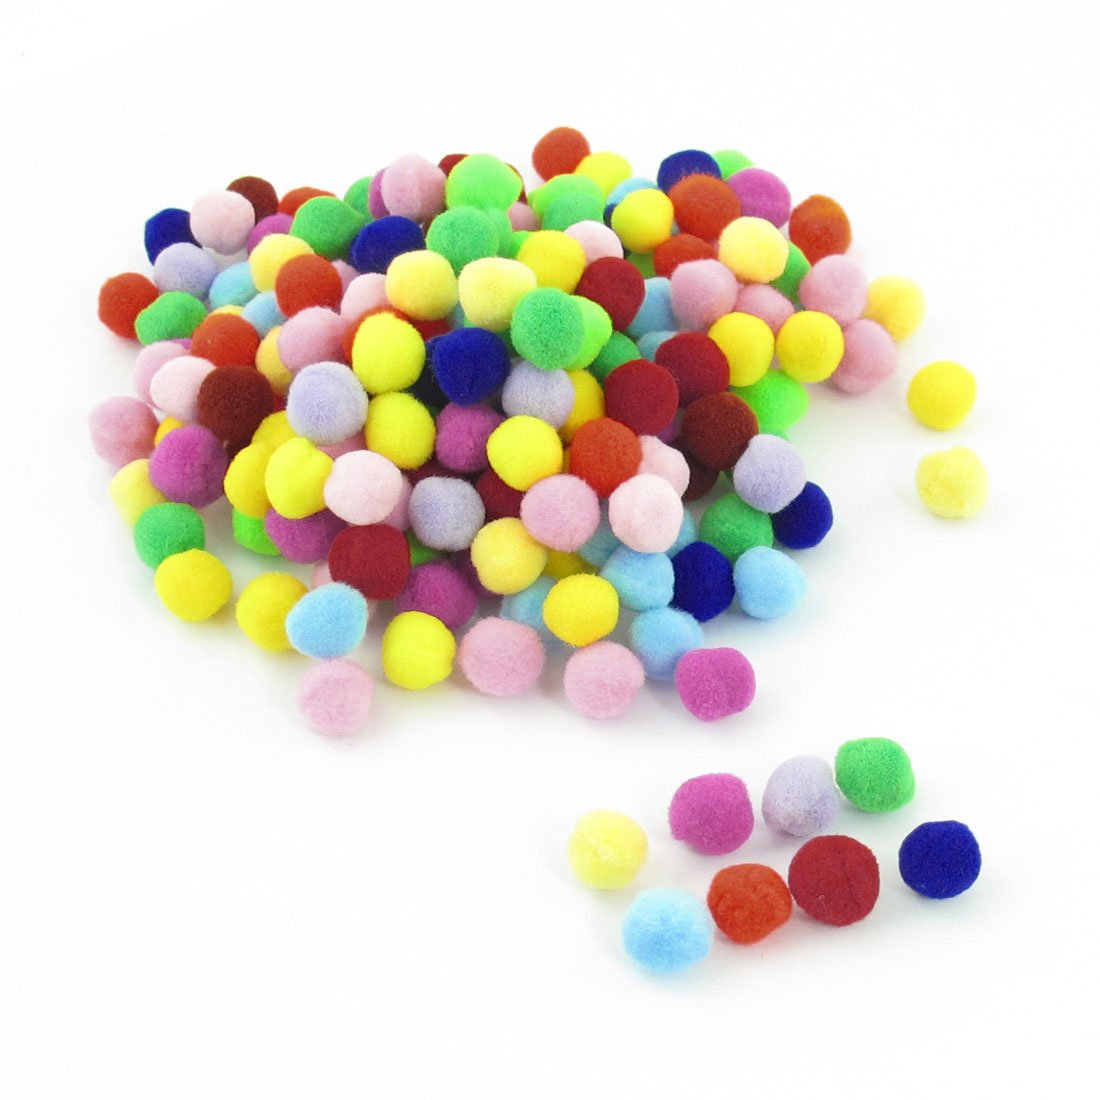 HOT SALE!200 Pcs 10mm Dia Plush Pom Ball Sew On Clothes Trousers Bags